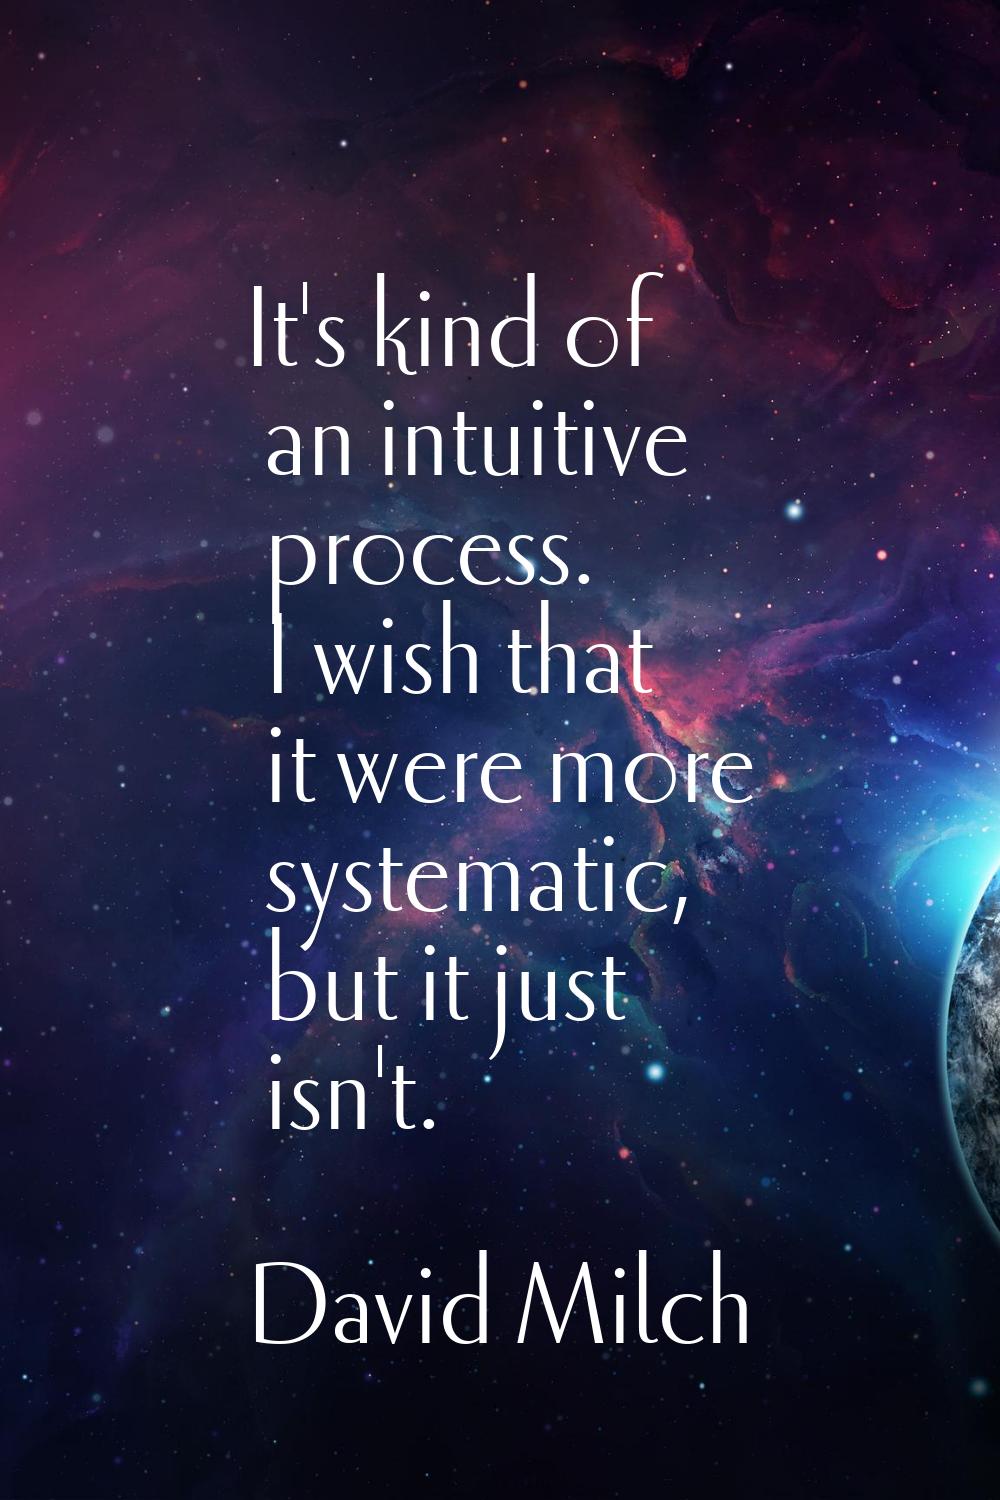 It's kind of an intuitive process. I wish that it were more systematic, but it just isn't.